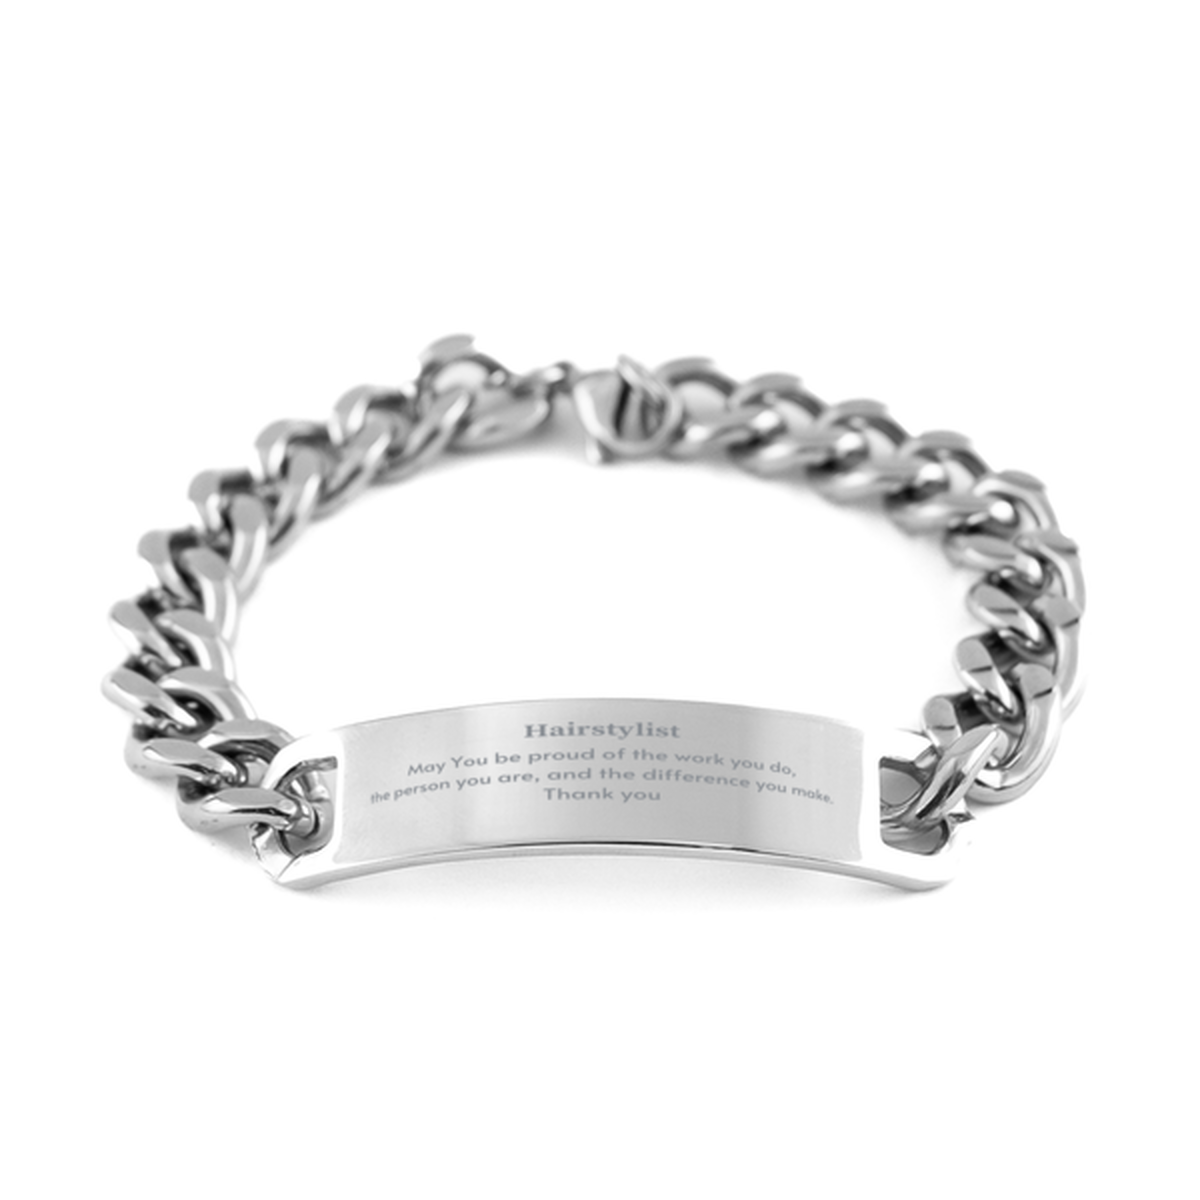 Heartwarming Cuban Chain Stainless Steel Bracelet Retirement Coworkers Gifts for Hairstylist, Hairstylist May You be proud of the work you do, the person you are Gifts for Boss Men Women Friends